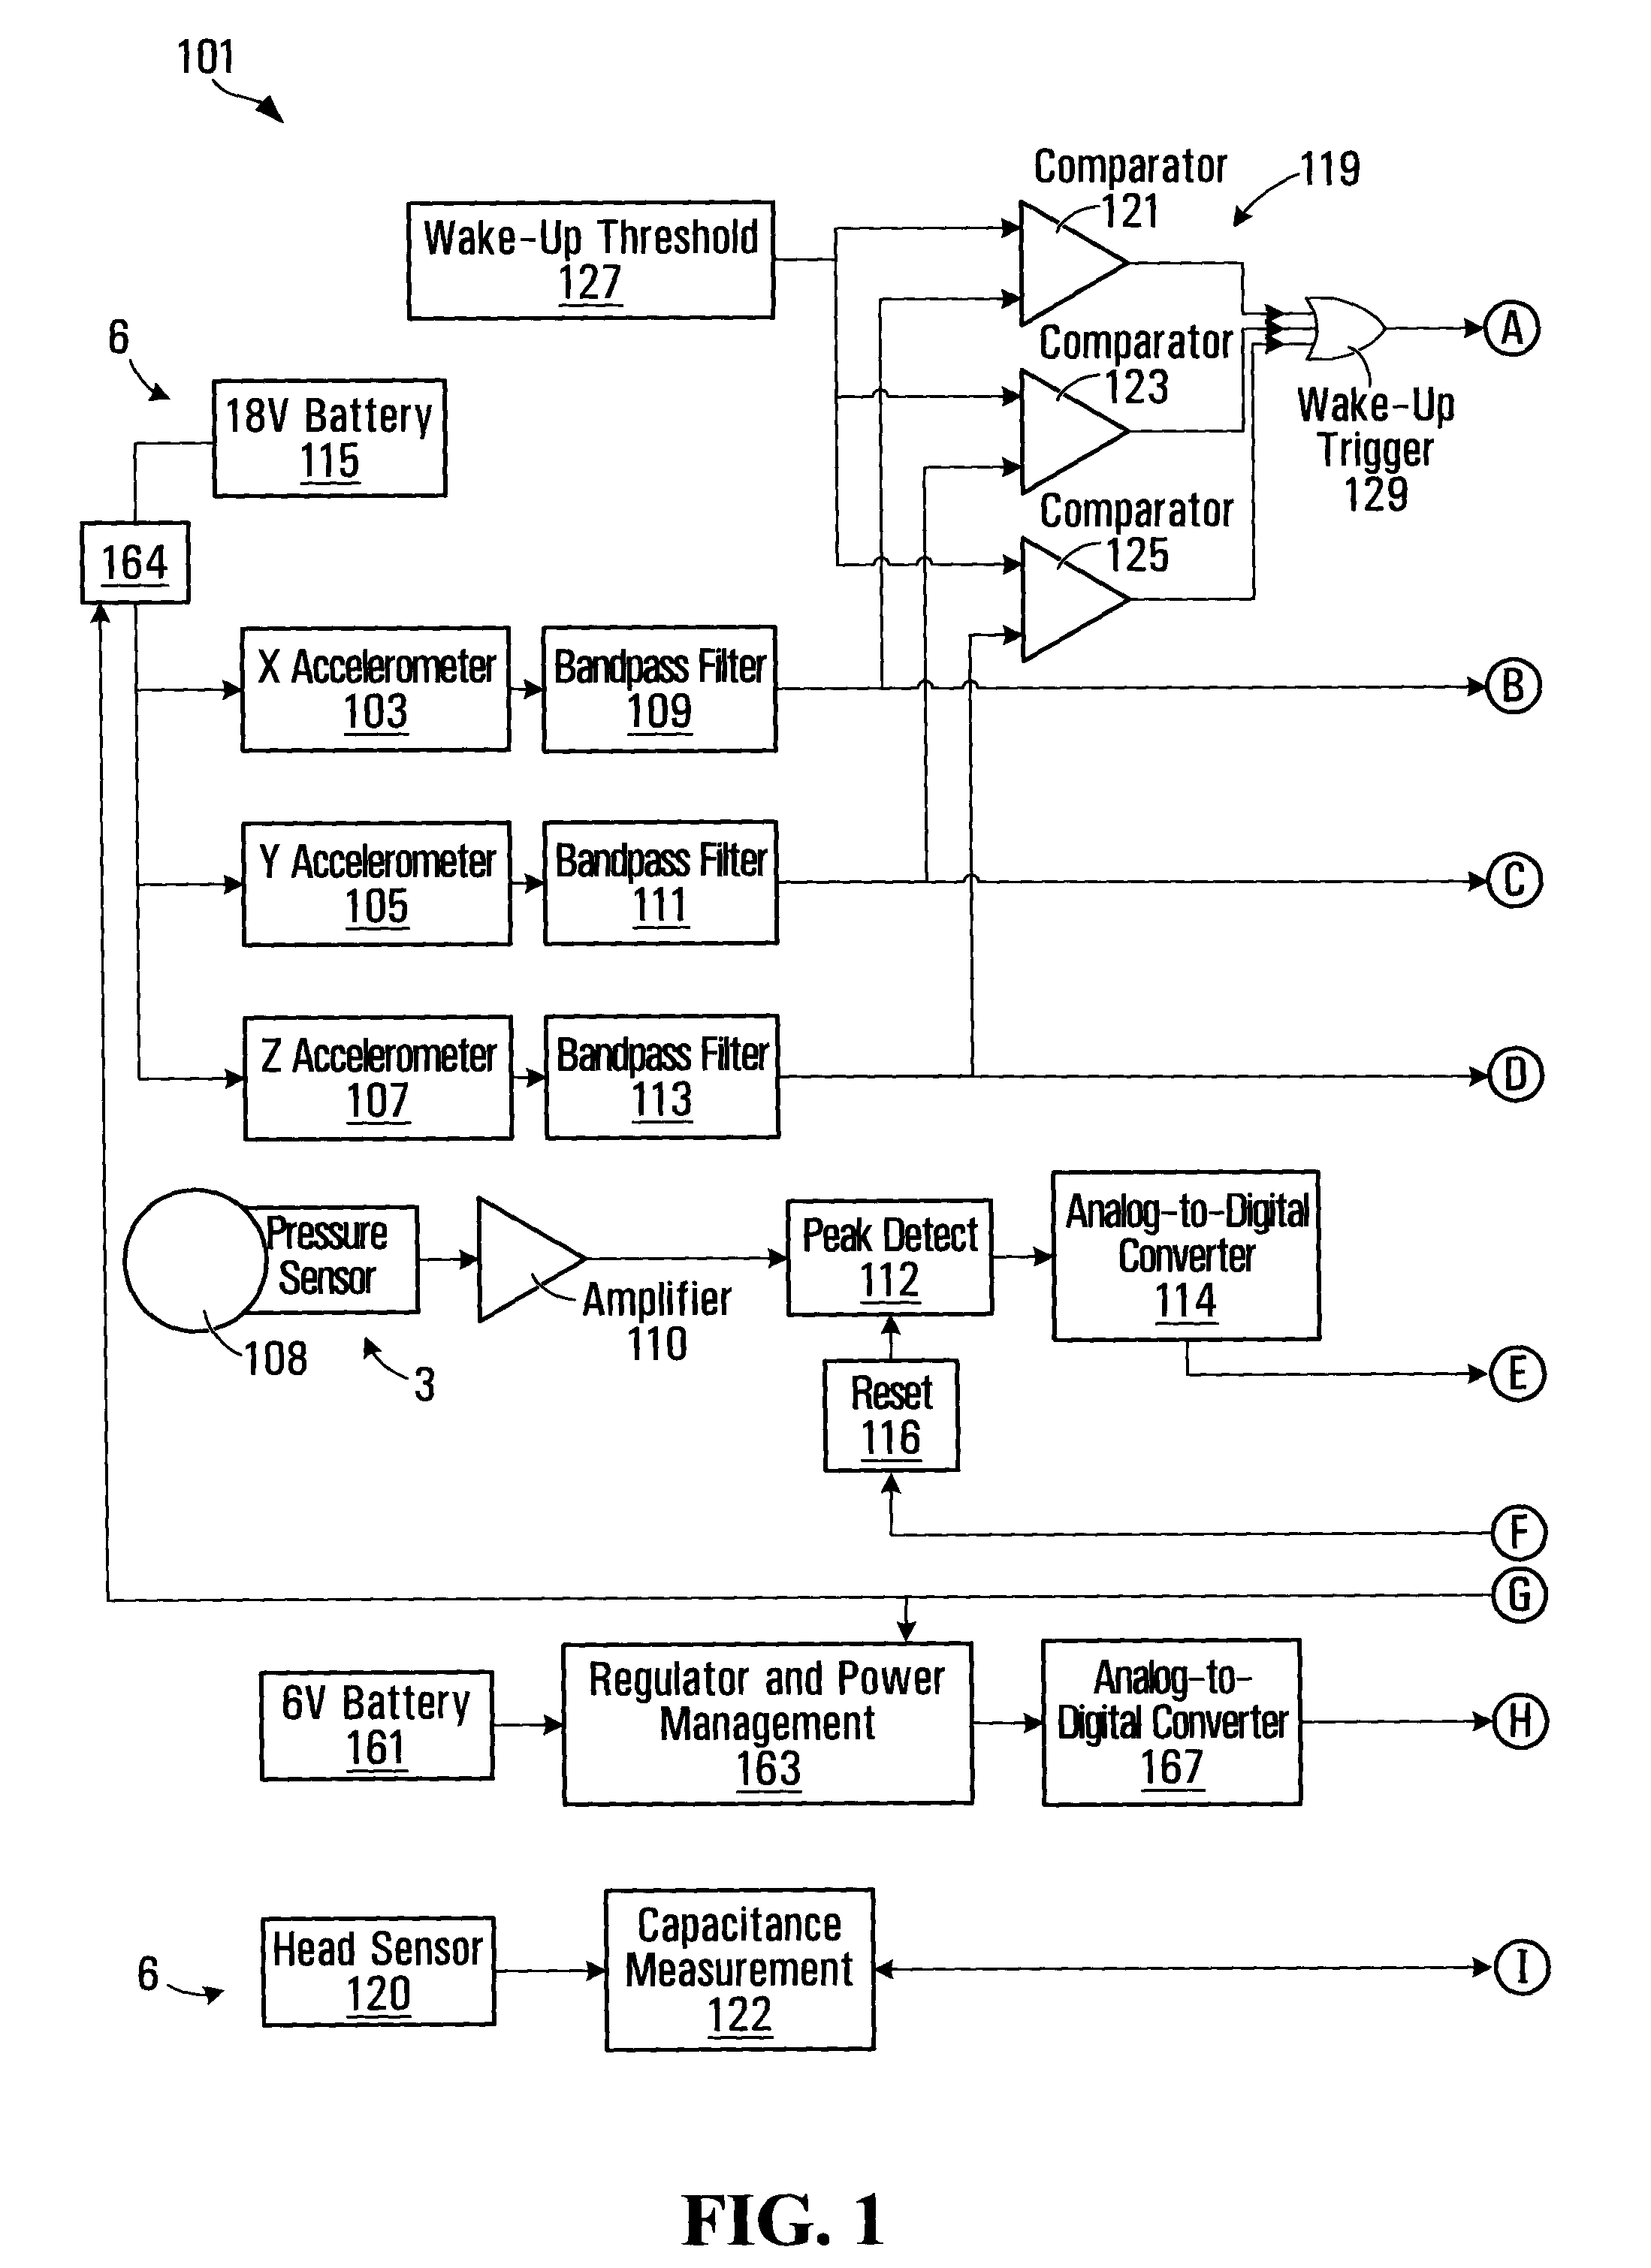 Apparatus and Method for Measuring and Recording Data from Violent Events